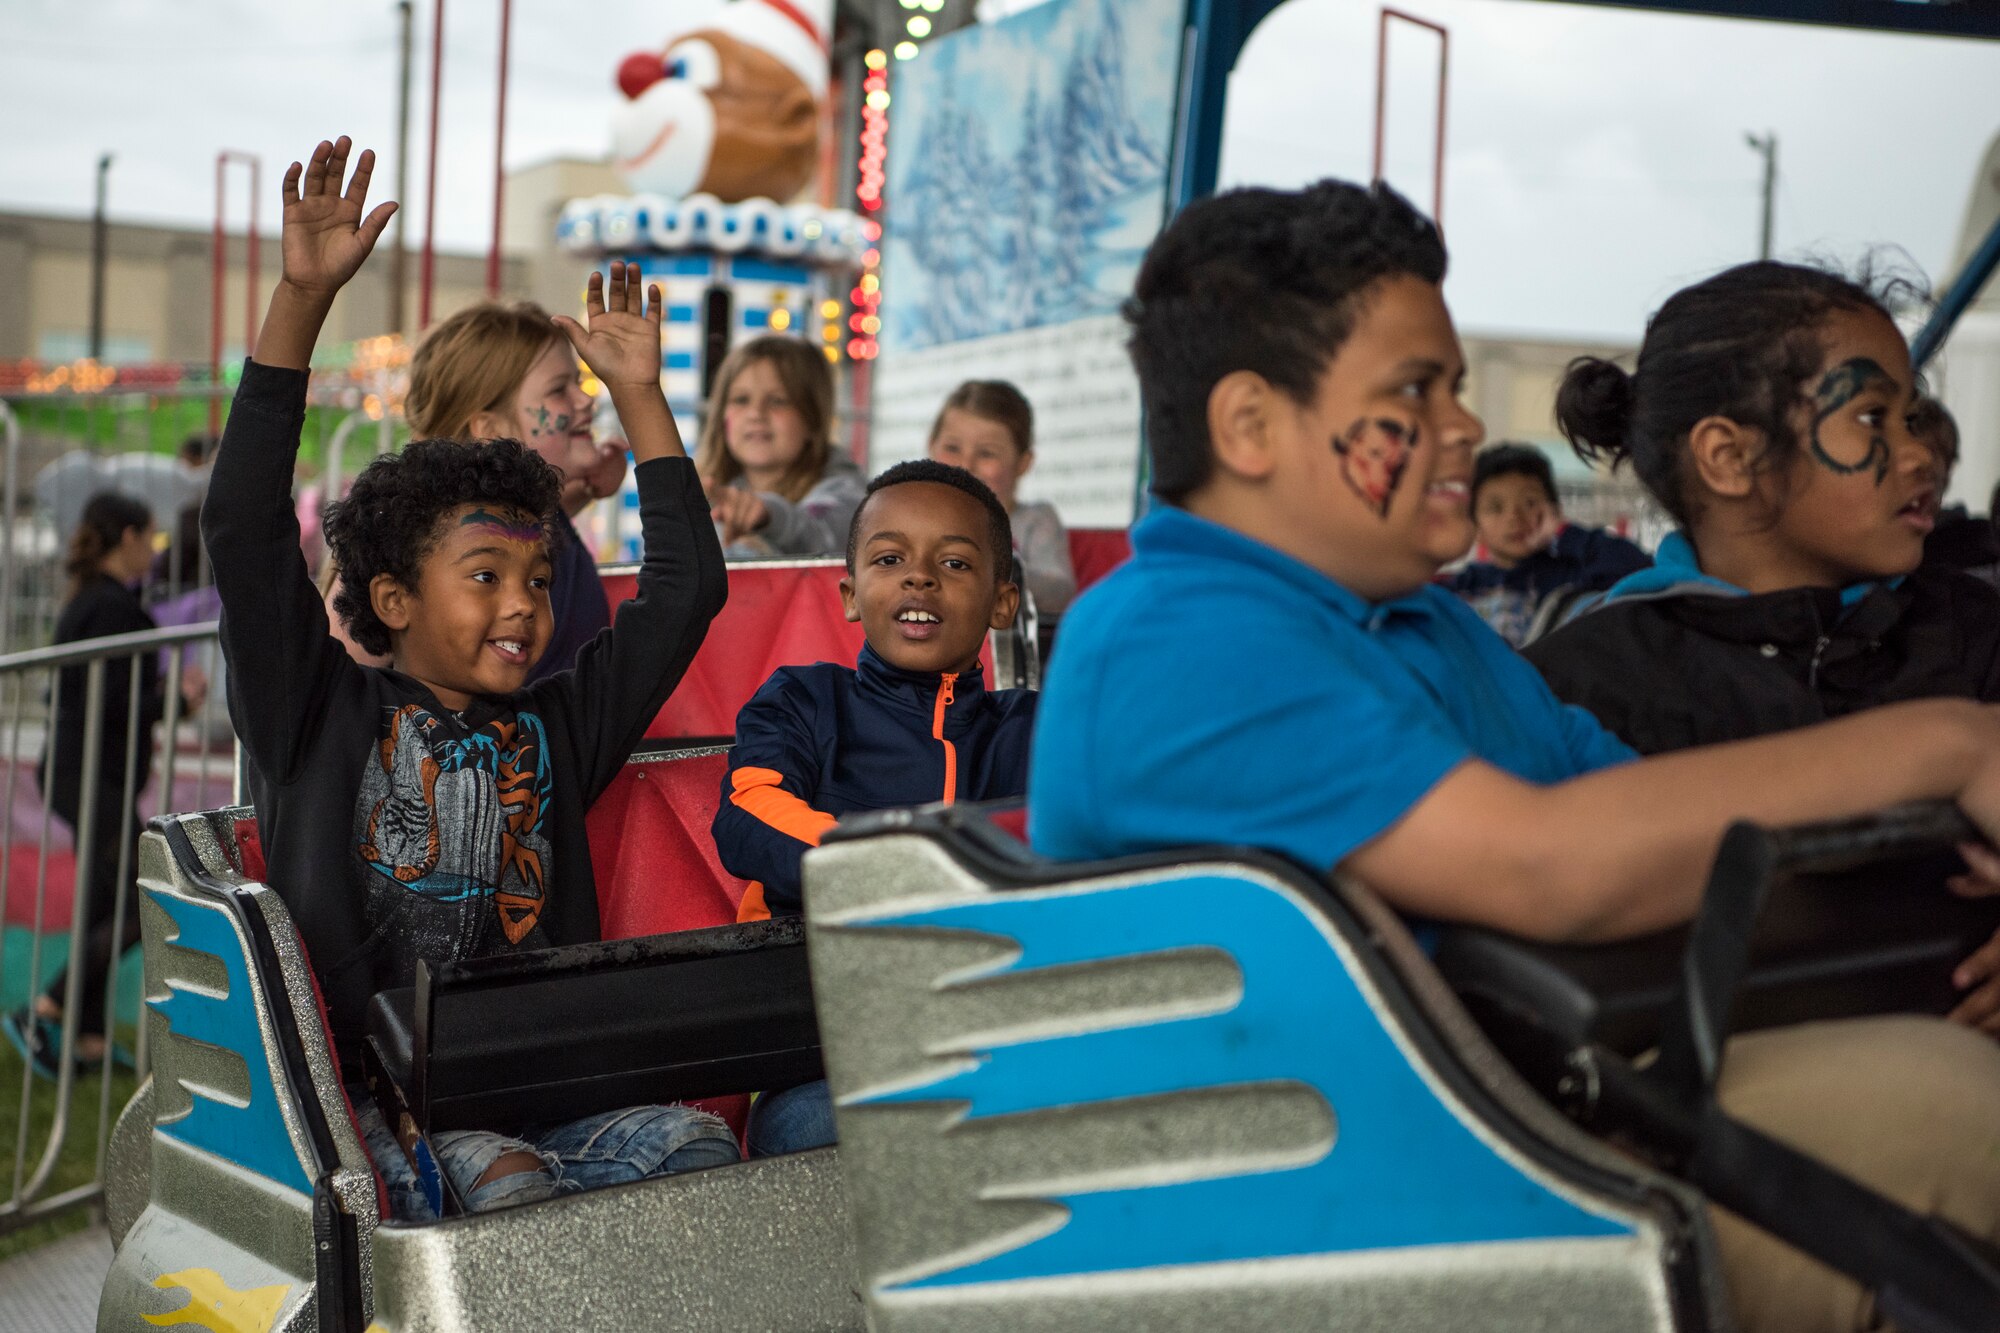 Children ride the “Silver Streak” during the 3rd annual Summer Fest hosted by the 673d Force Support Squadron at Joint Base Elmendorf-Richardson, Alaska, July 8, 2018. The event was open to anyone with base access and offered free activities such as carnival rides, a petting zoo, face painting, a bungee trampoline, and carnival games.